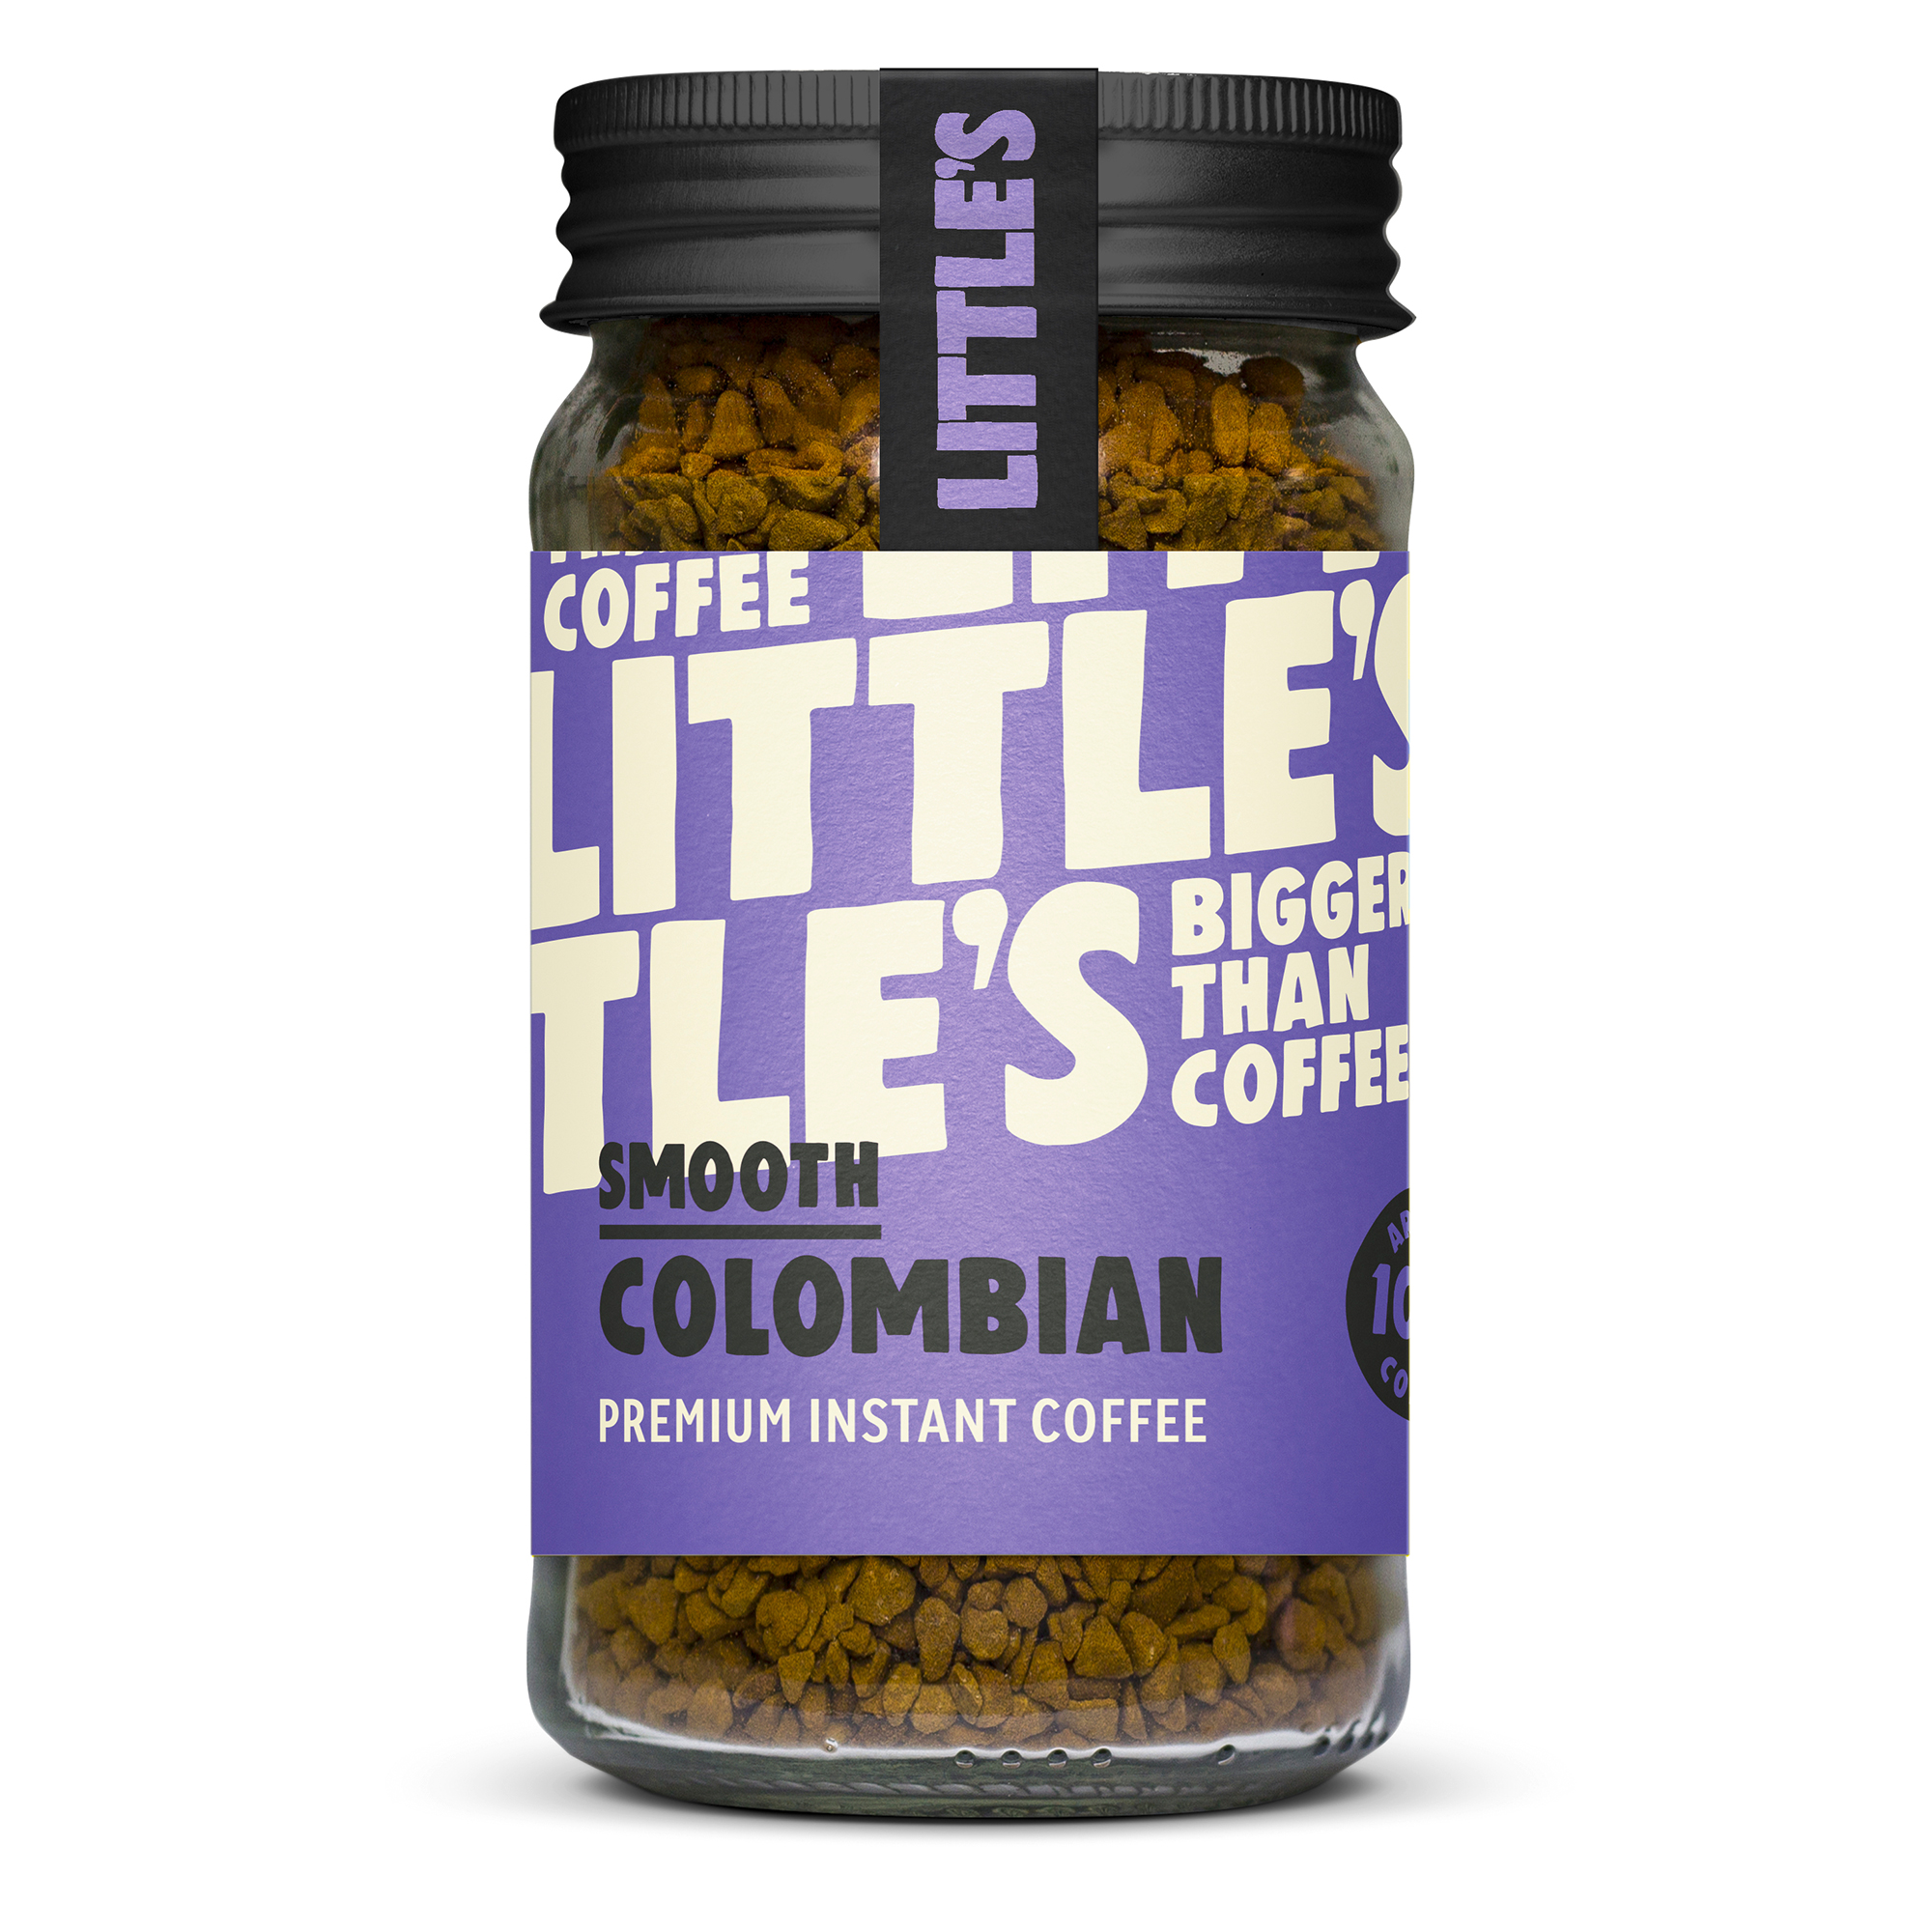 Smooth Colombian Premium Instant Coffee